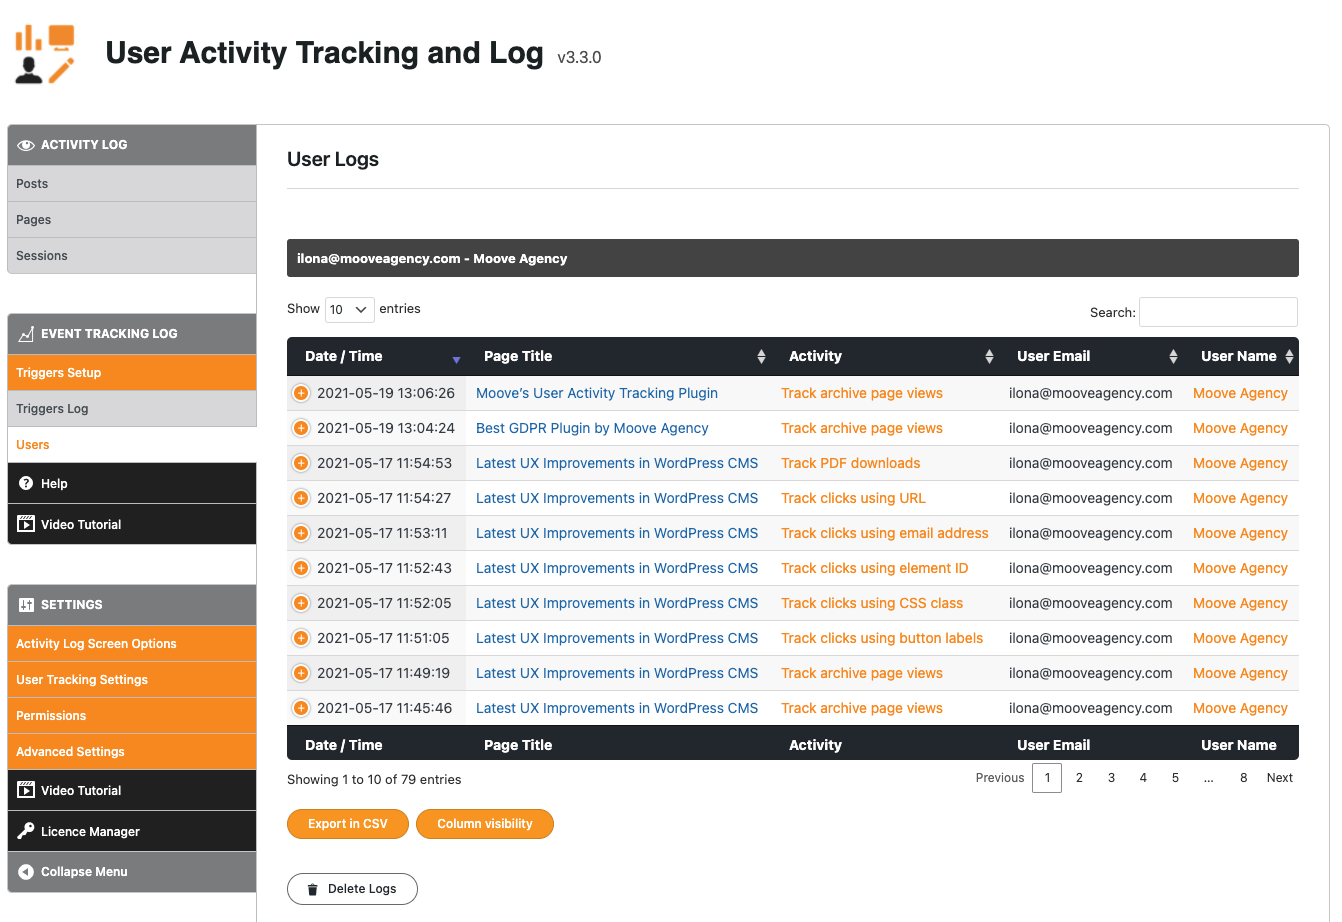 User Activity Tracking and Log - User Tracking Settings [Premium]